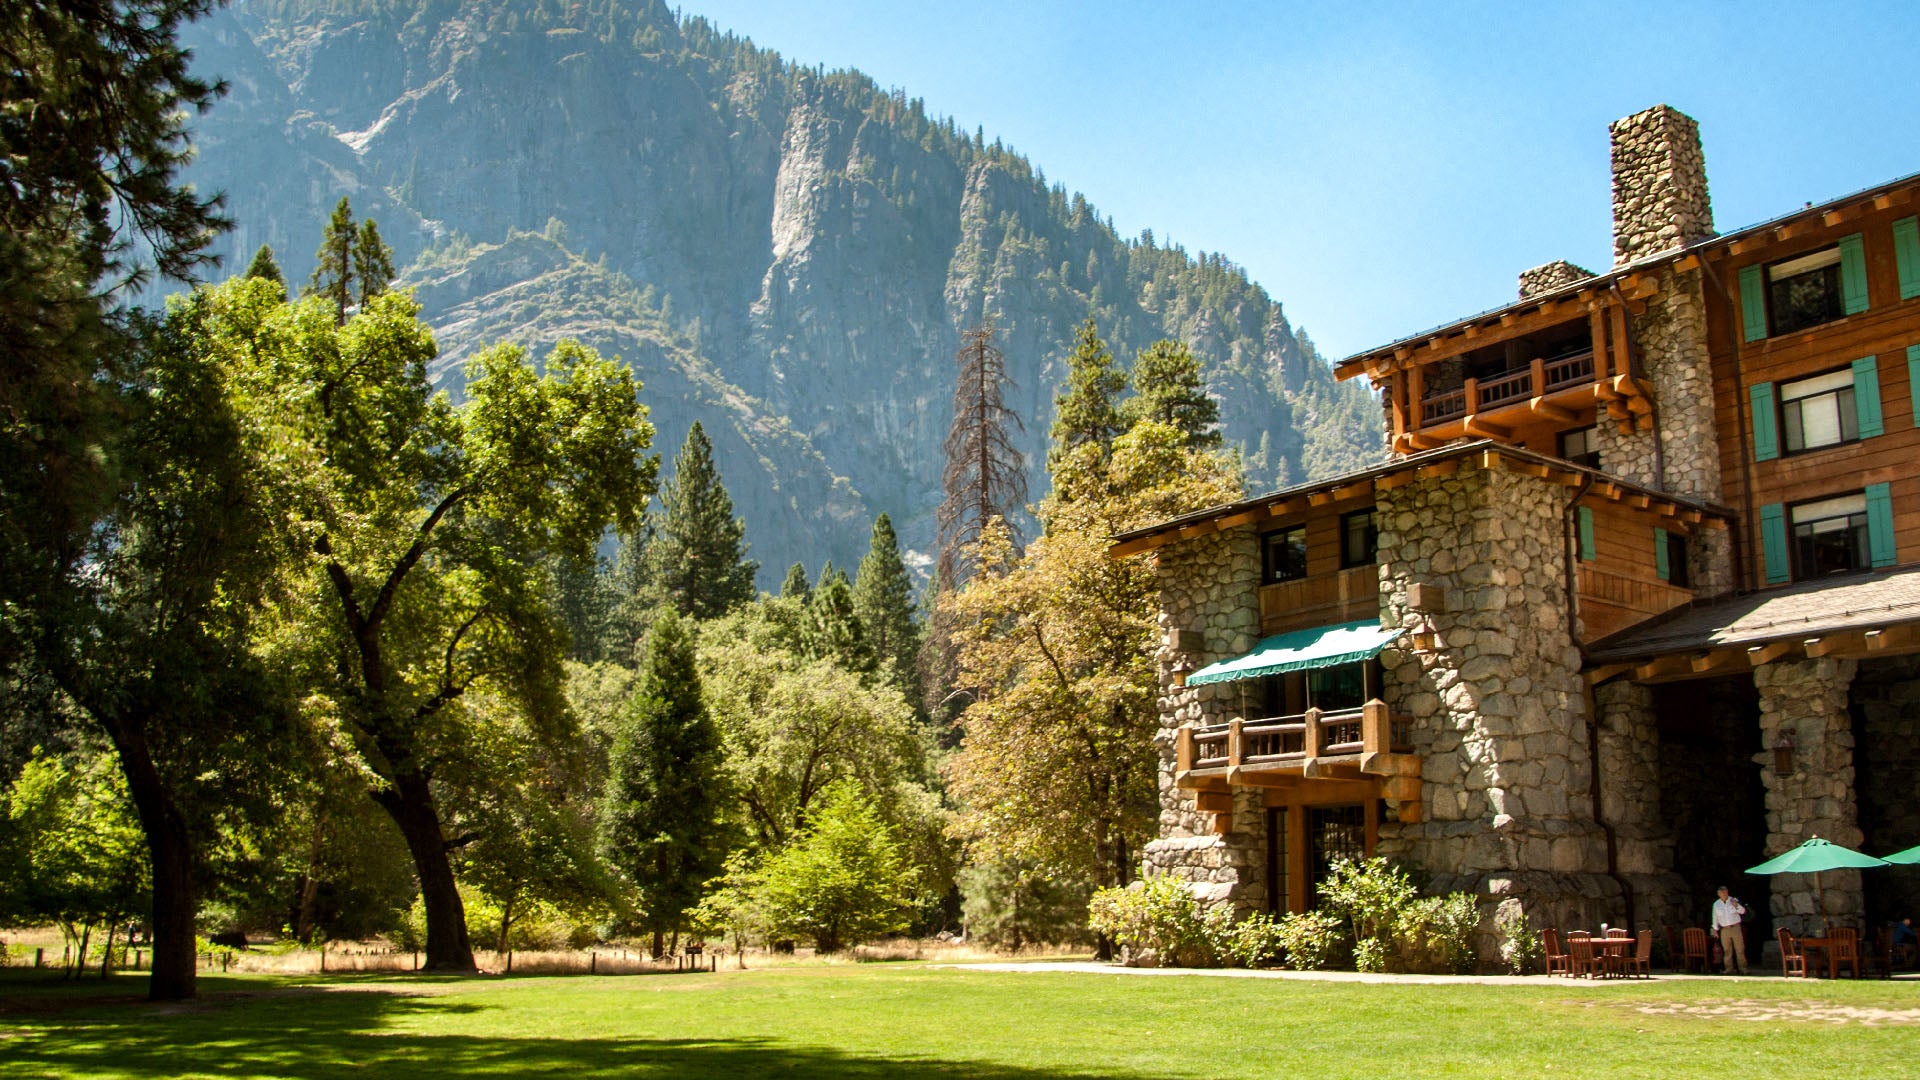 In-park hotels like the Majestic Yosemite Hotel at Yosemite National Park add an element of luxury to any outdoor adventure